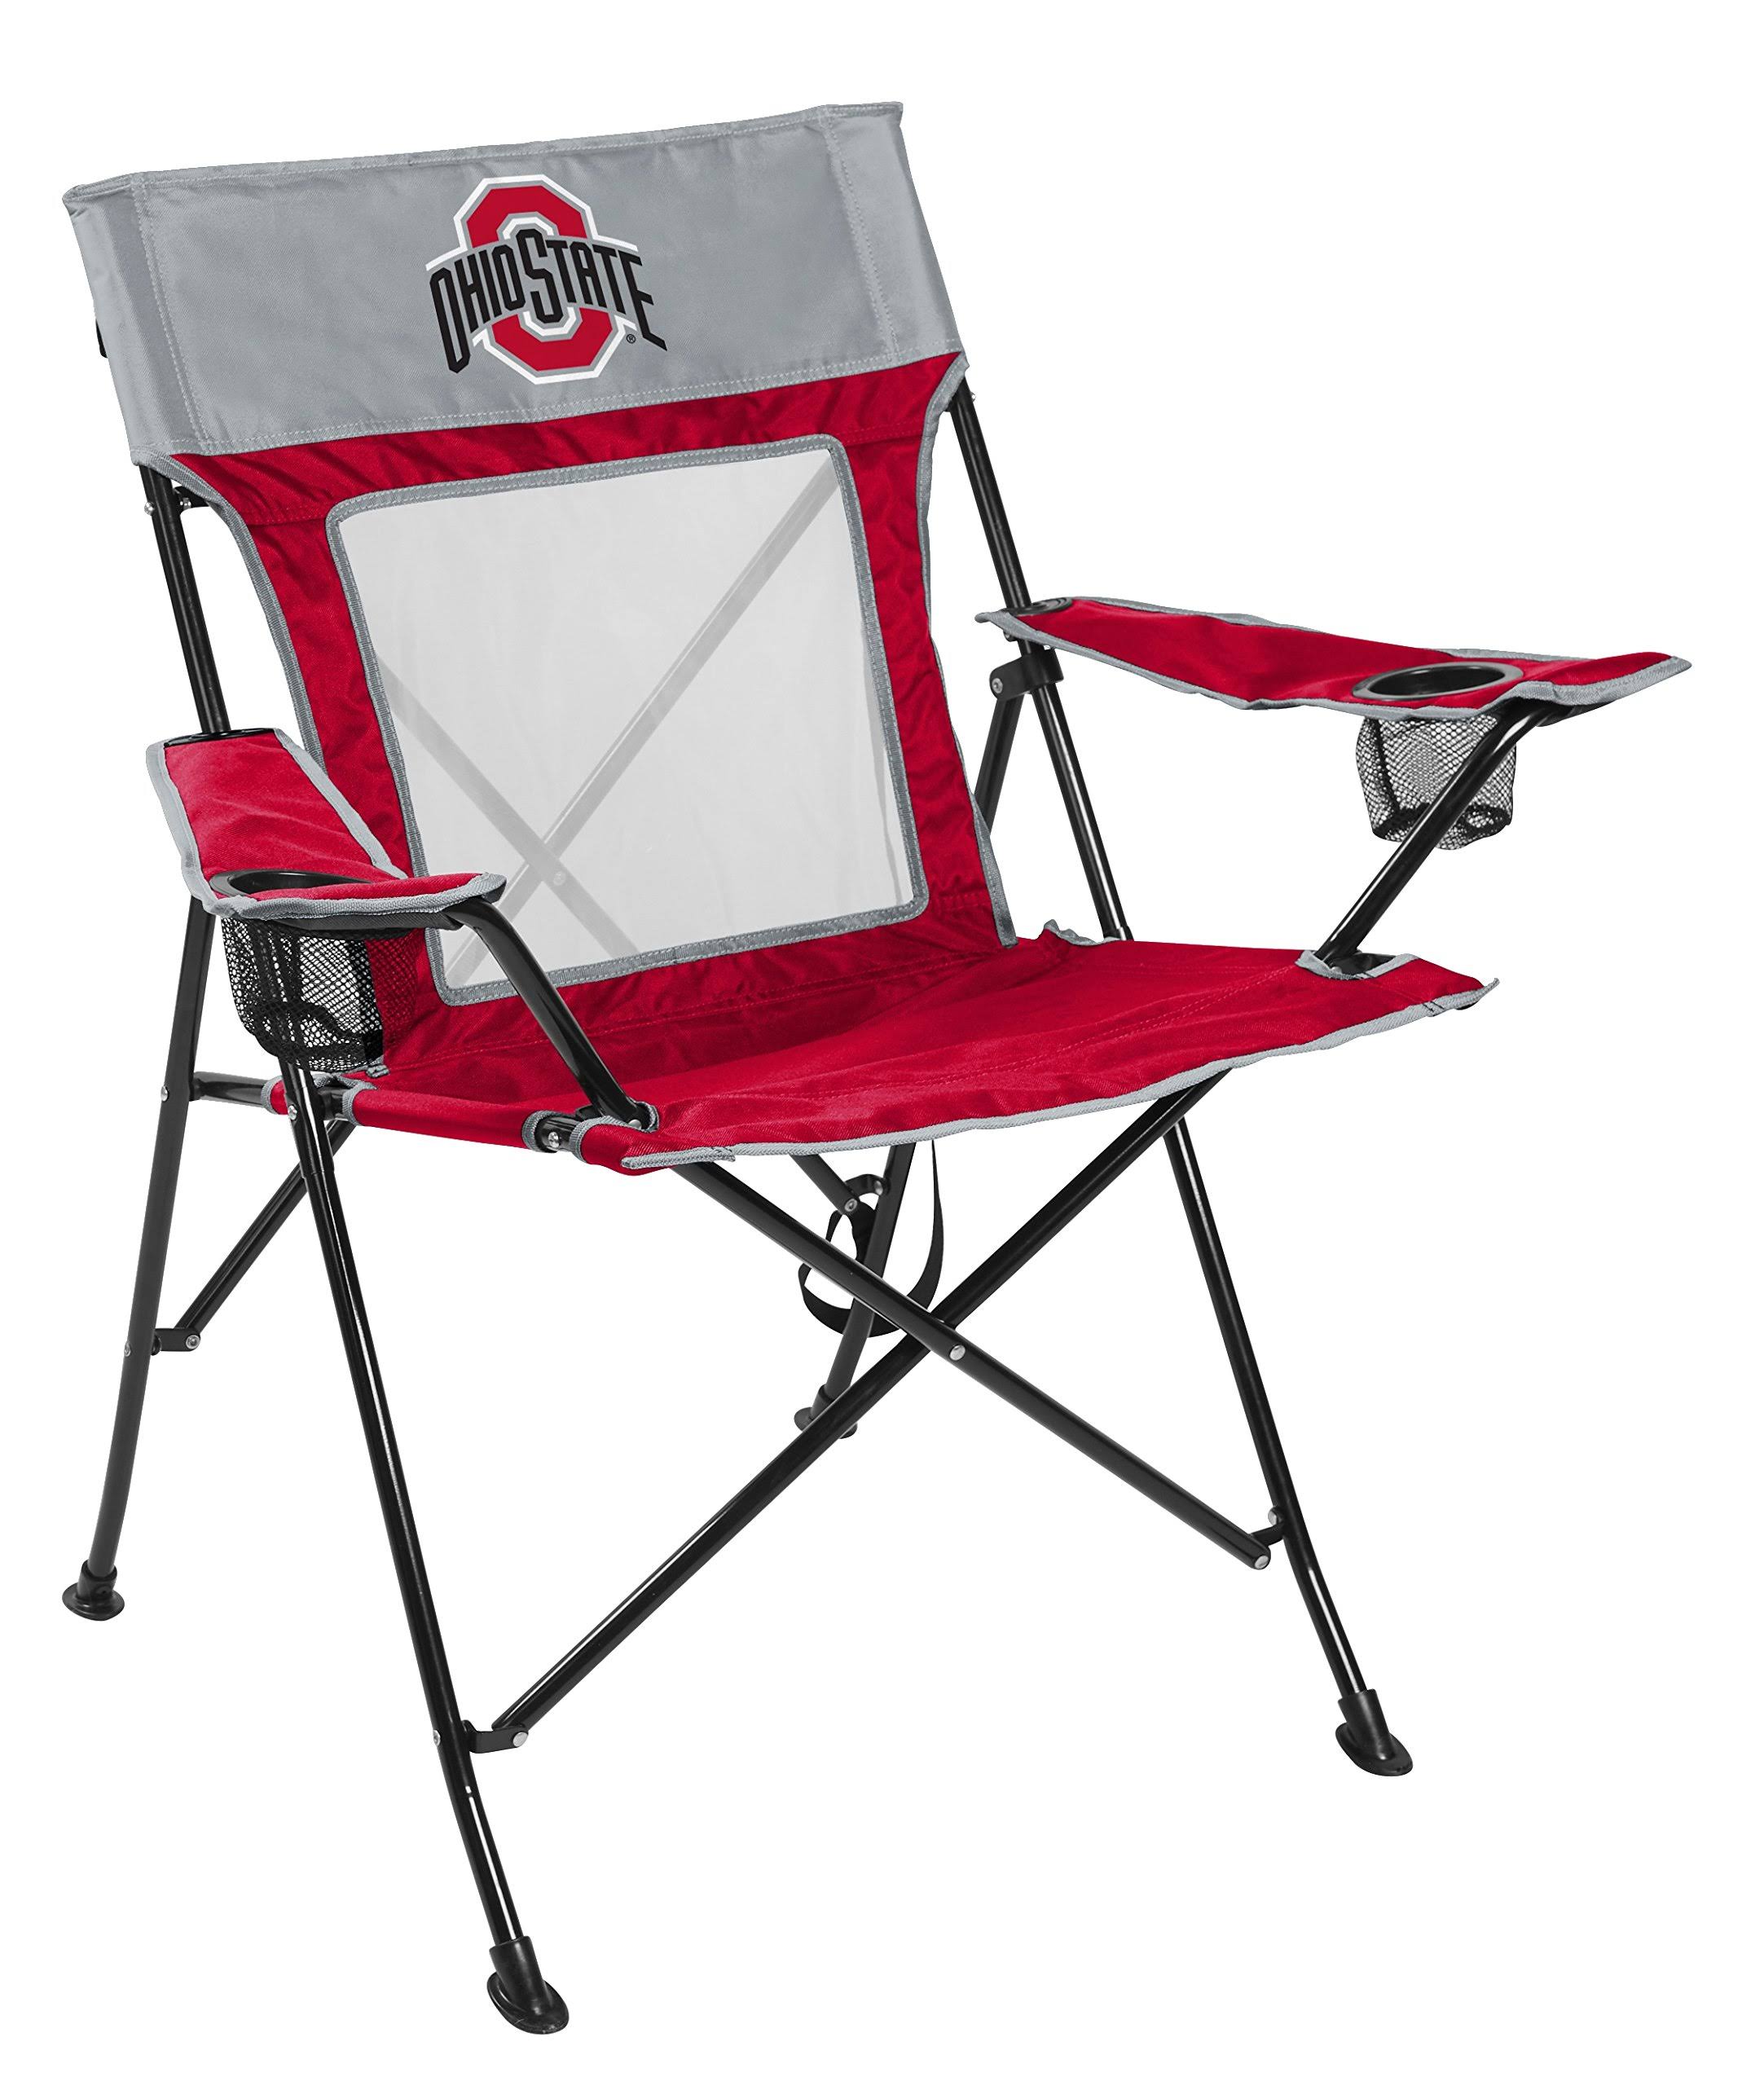 Rawlings Ohio State Buckeyes Game Changer Tailgate Chair - WGL-2-s